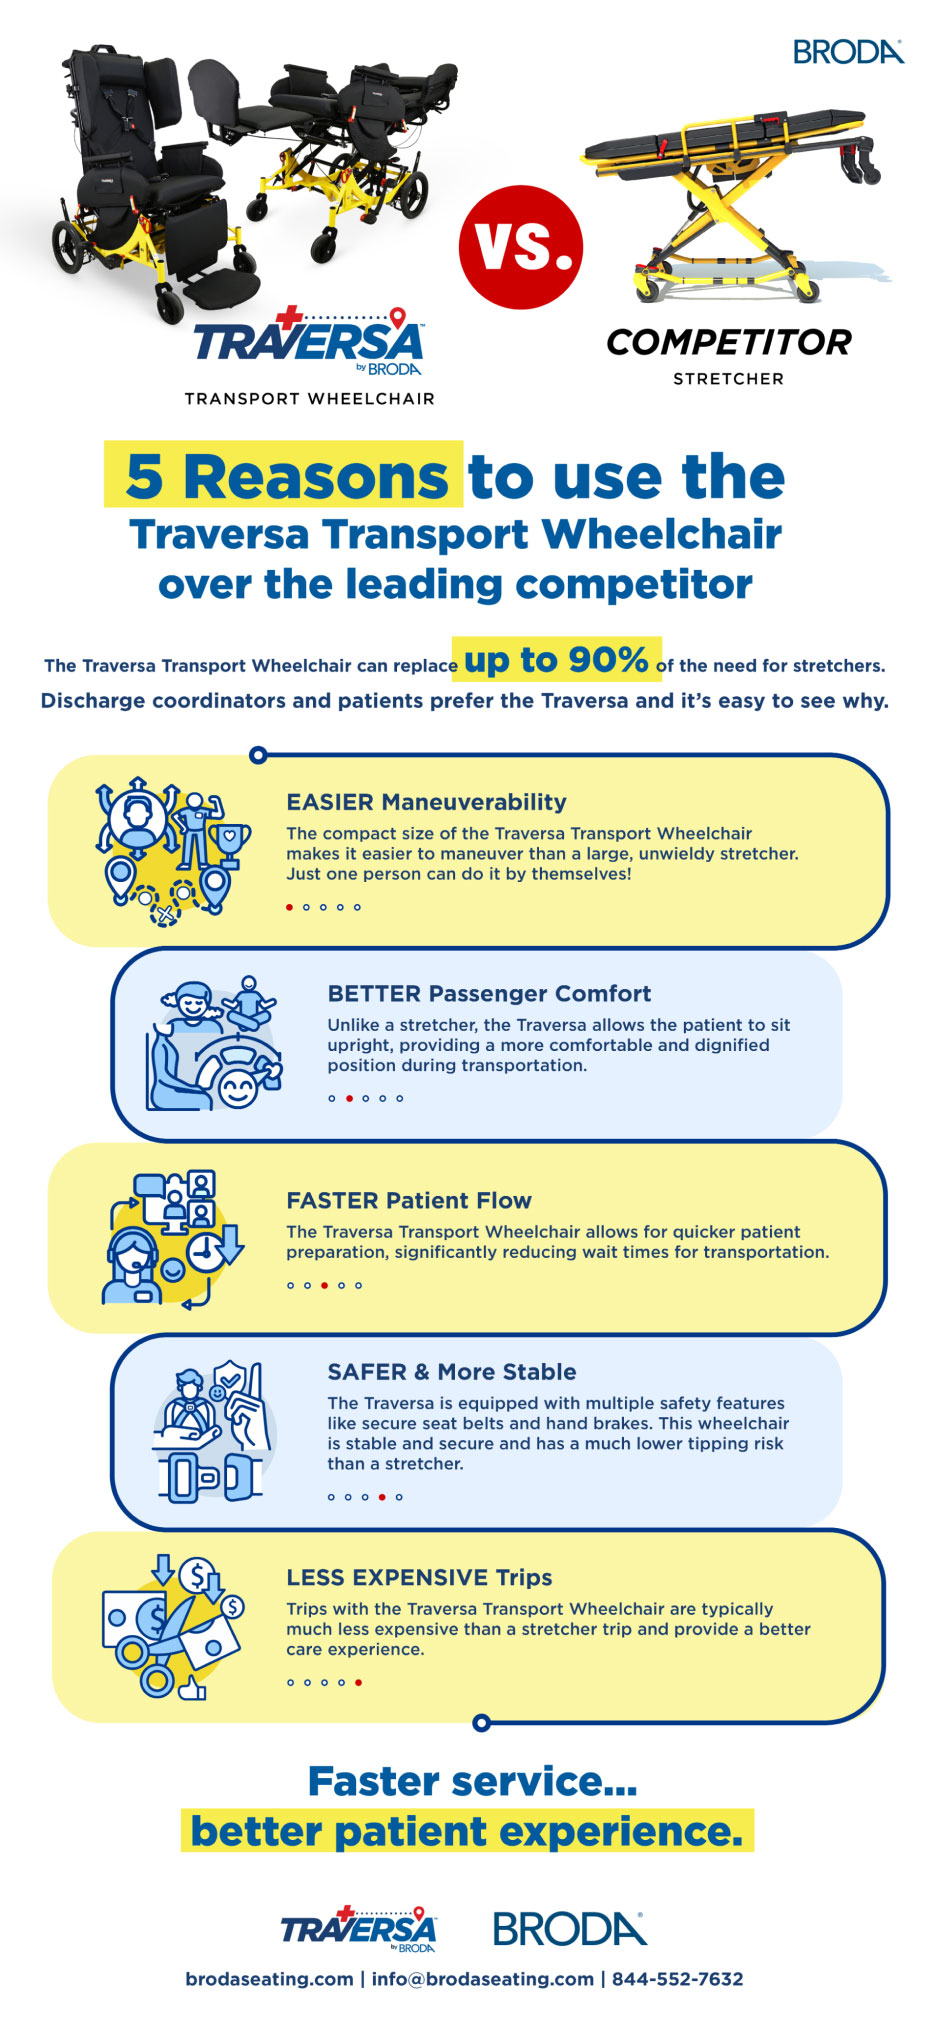 Illustration Detailing 5 Reasons to Use Traversa Transport Wheelchair Over Leading Competitor